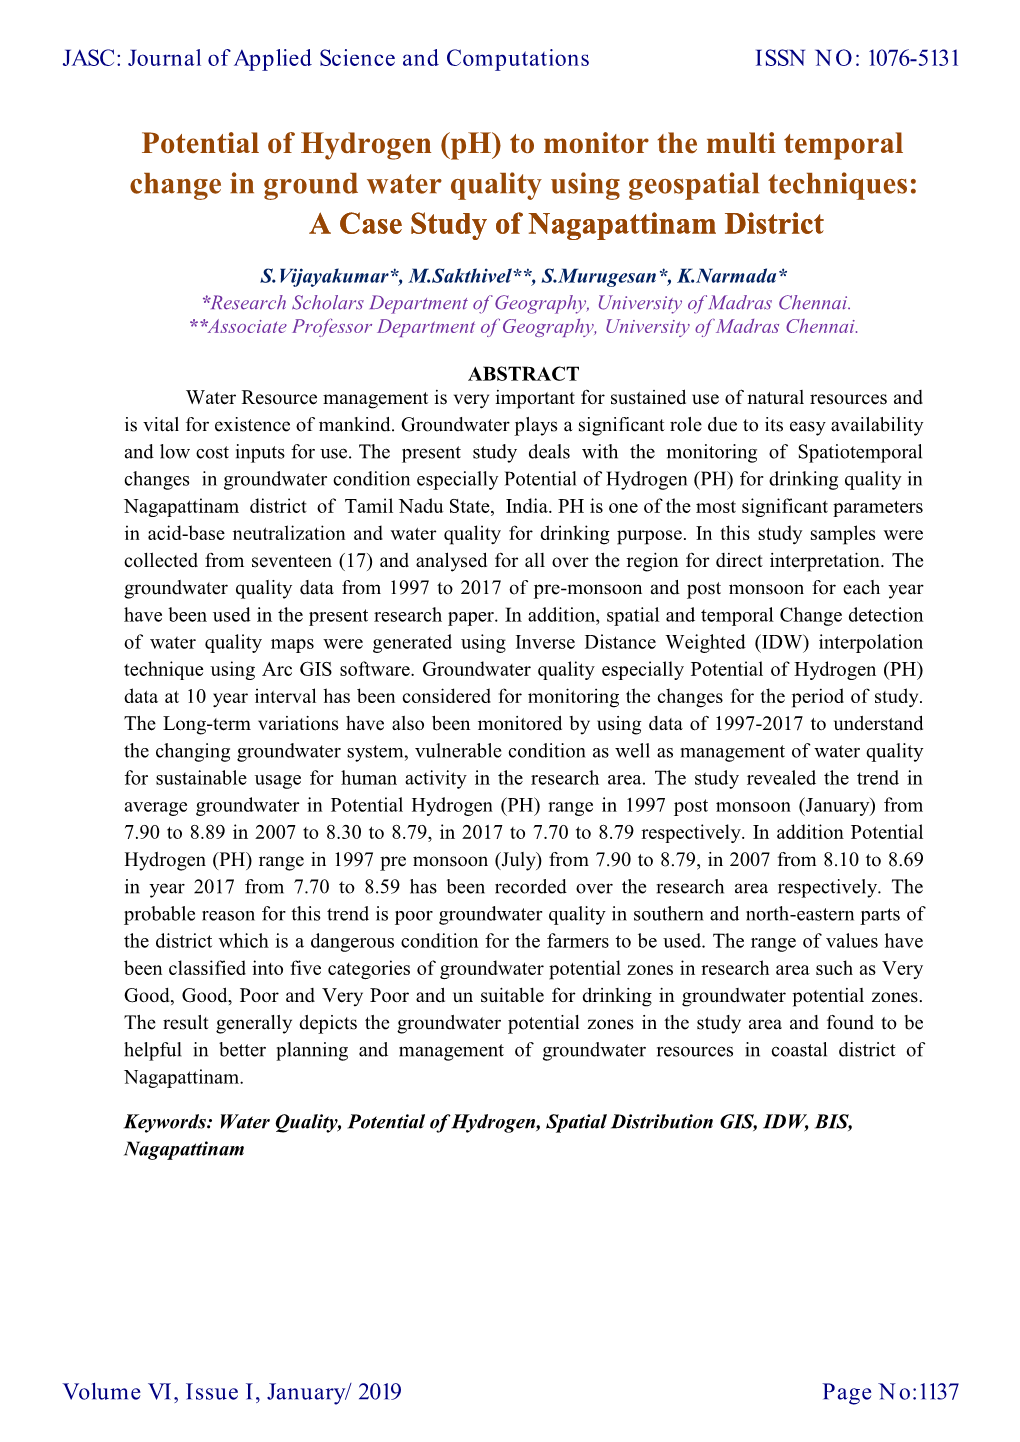 Ph) to Monitor the Multi Temporal Change in Ground Water Quality Using Geospatial Techniques: a Case Study of Nagapattinam District